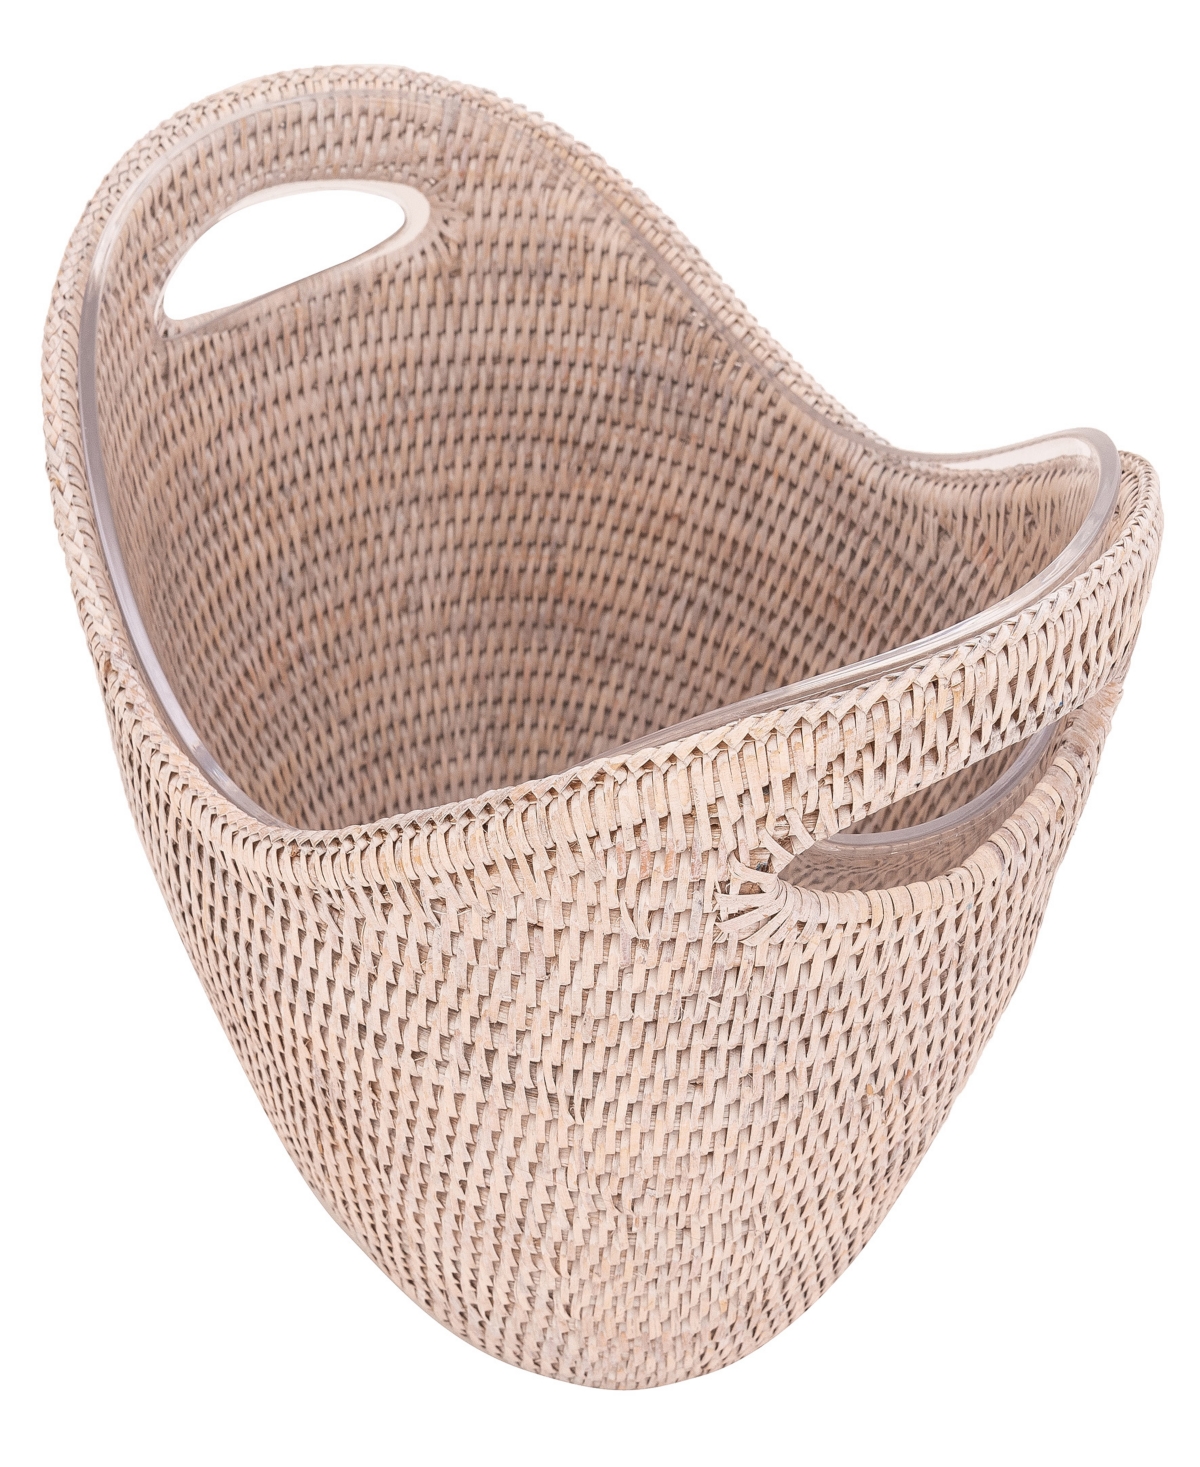 Artifacts Trading Company Rattan Champagne Bucket With Acrylic Insert In White Wash